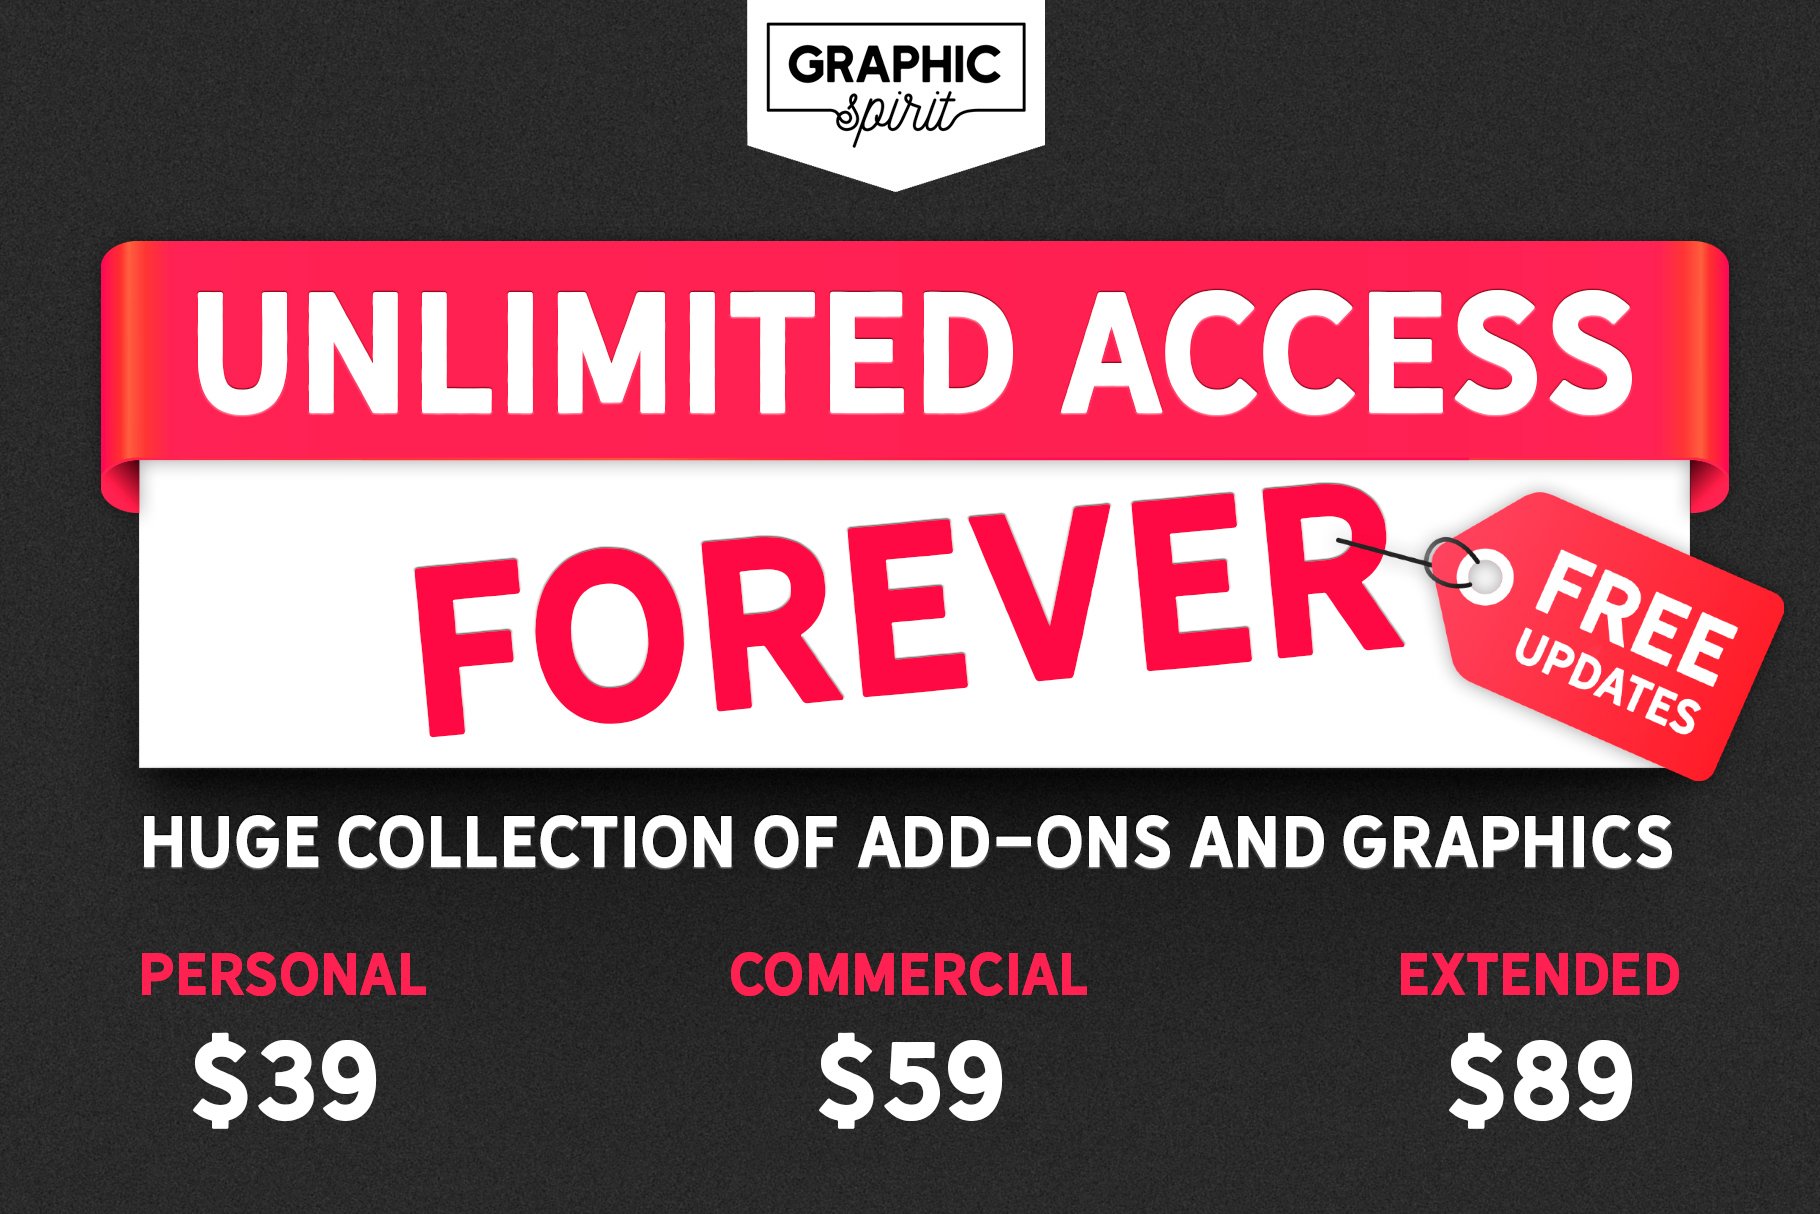 UNLIMITED ACCESS + FREE UPDATEScover image.